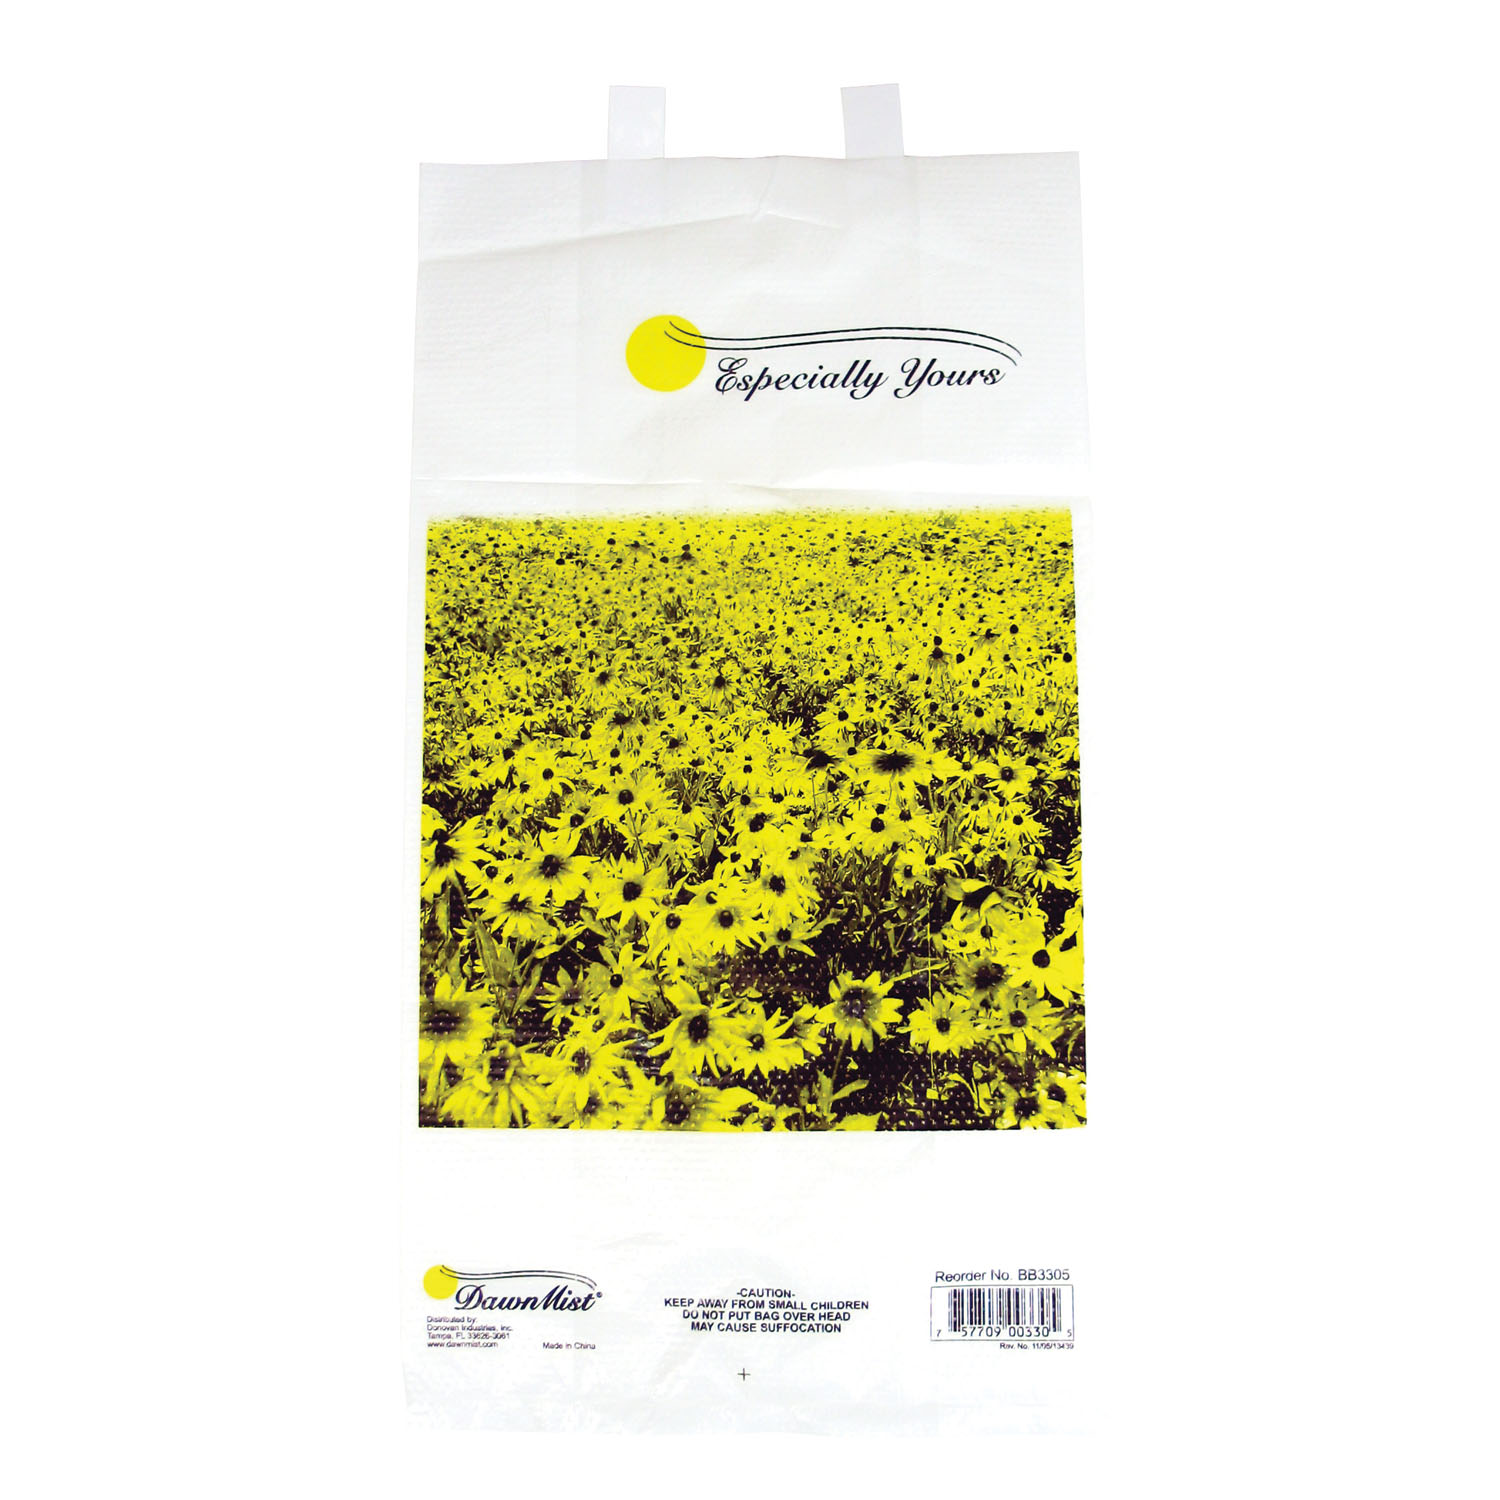 DUKAL DAWNMIST SPECIALITY BAGS : BB3305 PK $3.28 Stocked